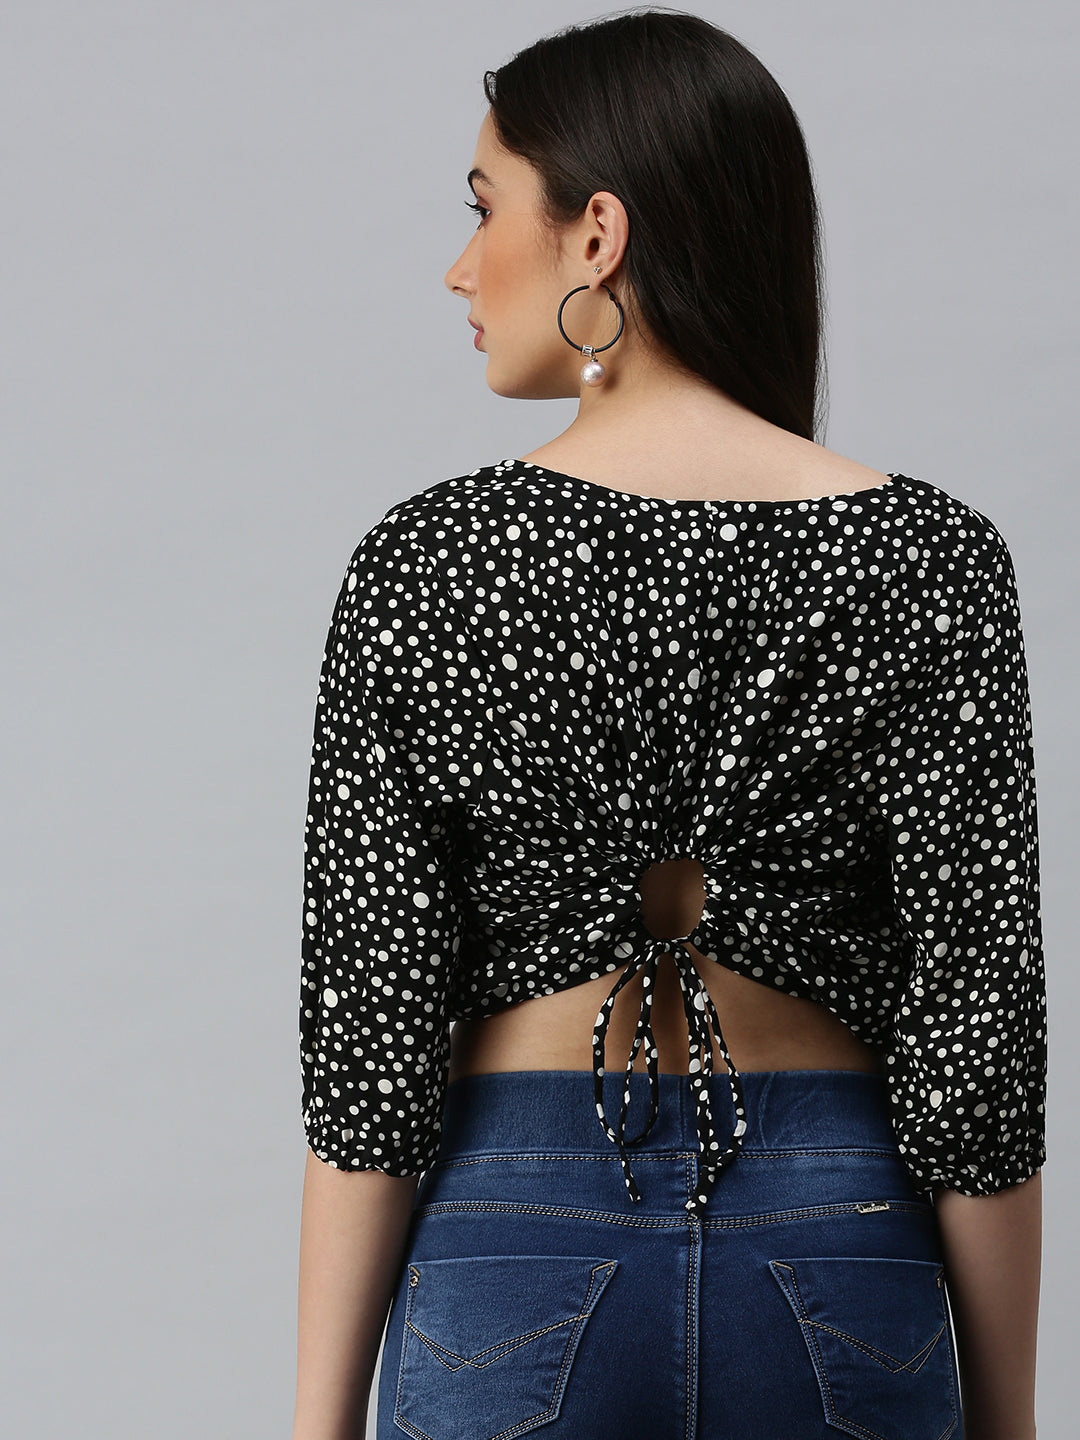 Women's Embroidered Black Top